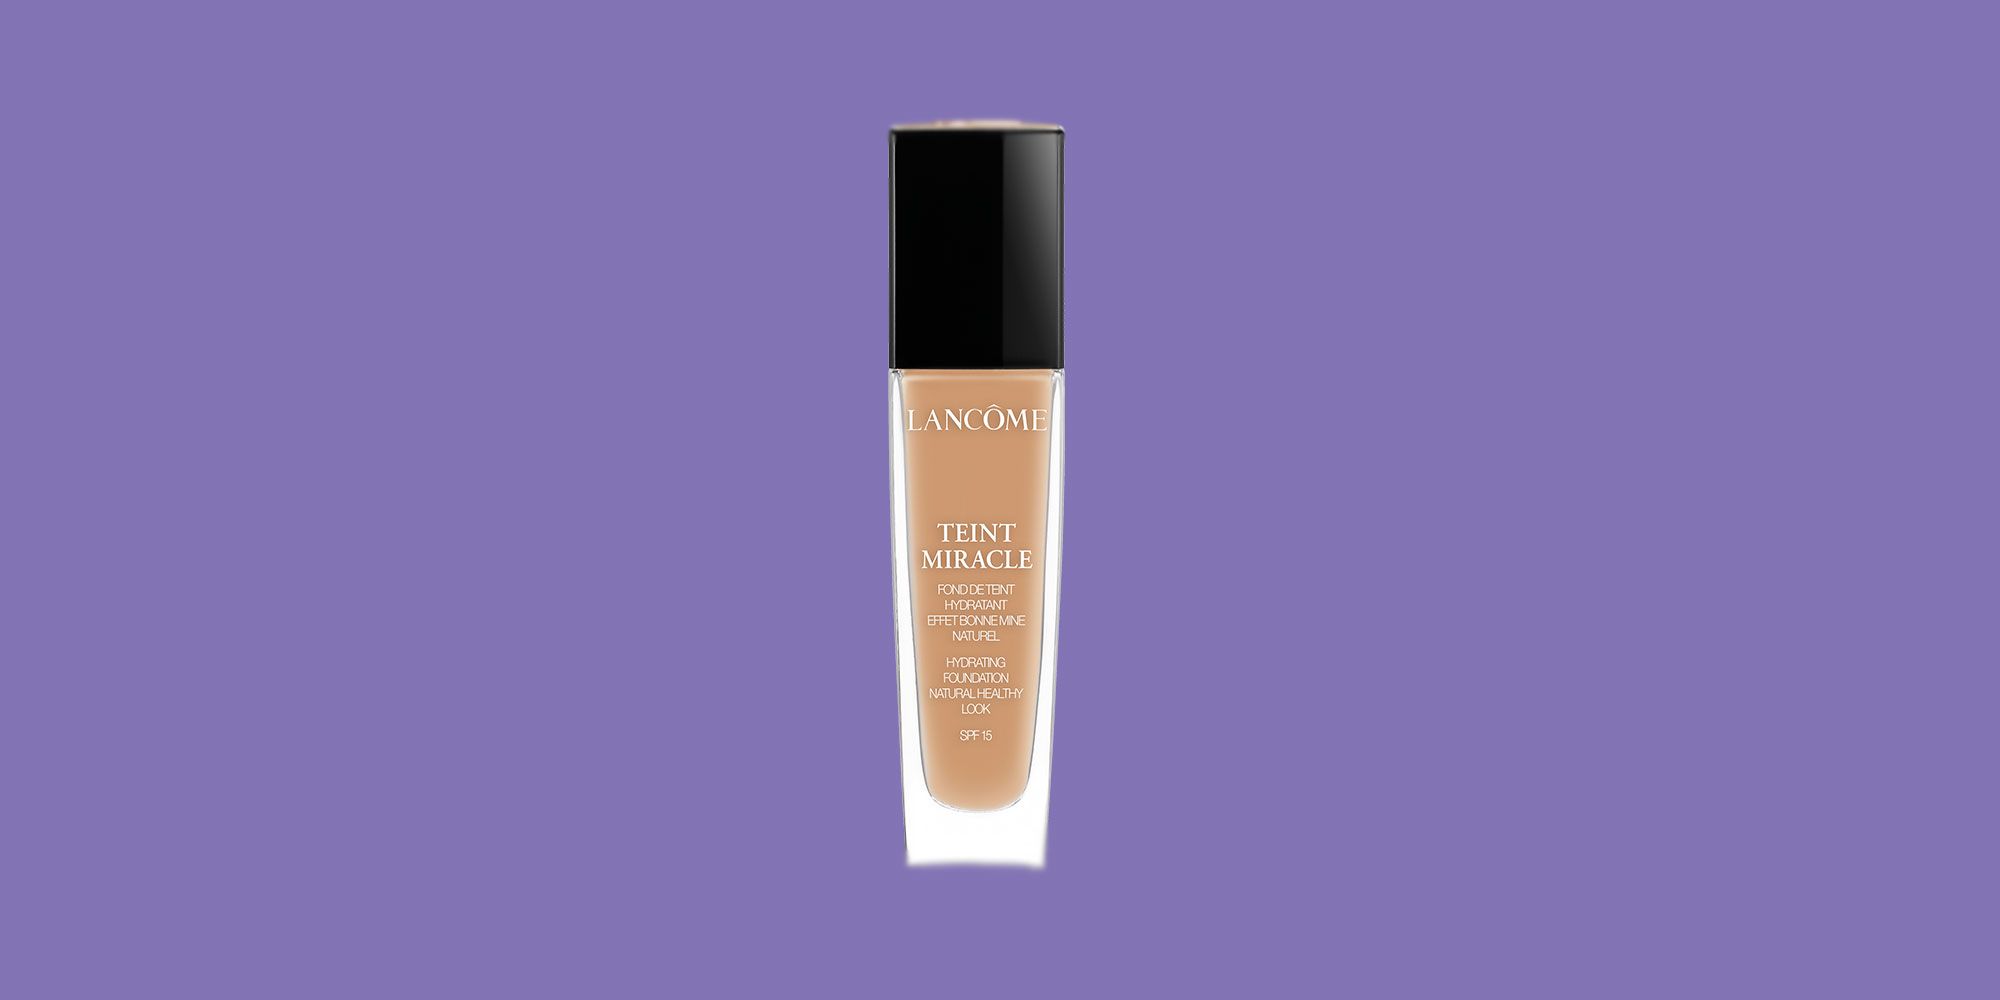 hul Sag Elendighed Lancôme Teint Miracle Hydrating Foundation Review